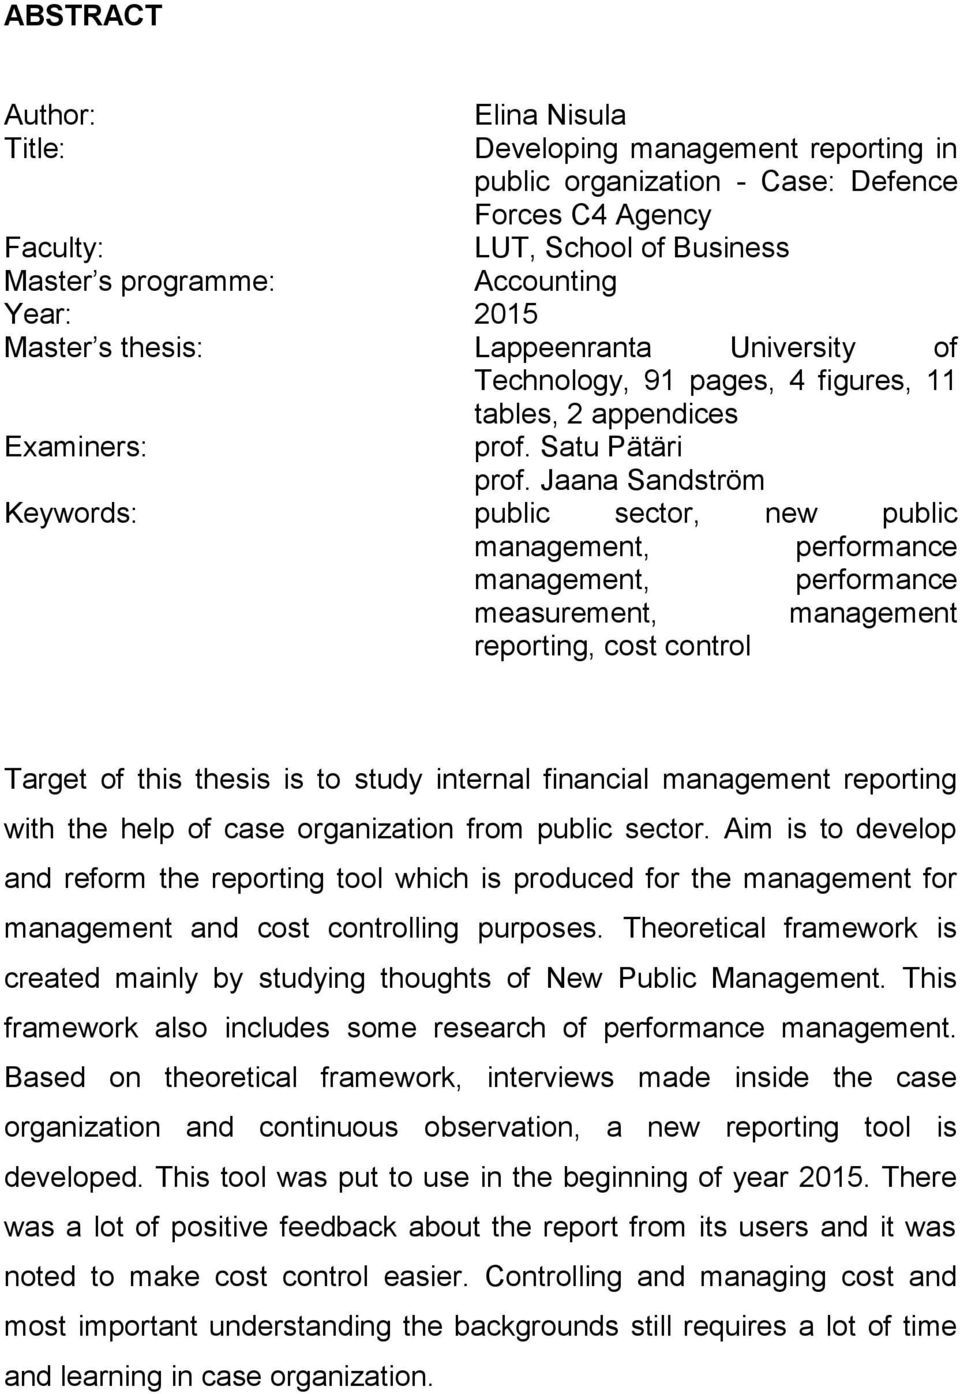 Jaana Sandström Keywords: public sector, new public management, performance management, performance measurement, management reporting, cost control Target of this thesis is to study internal